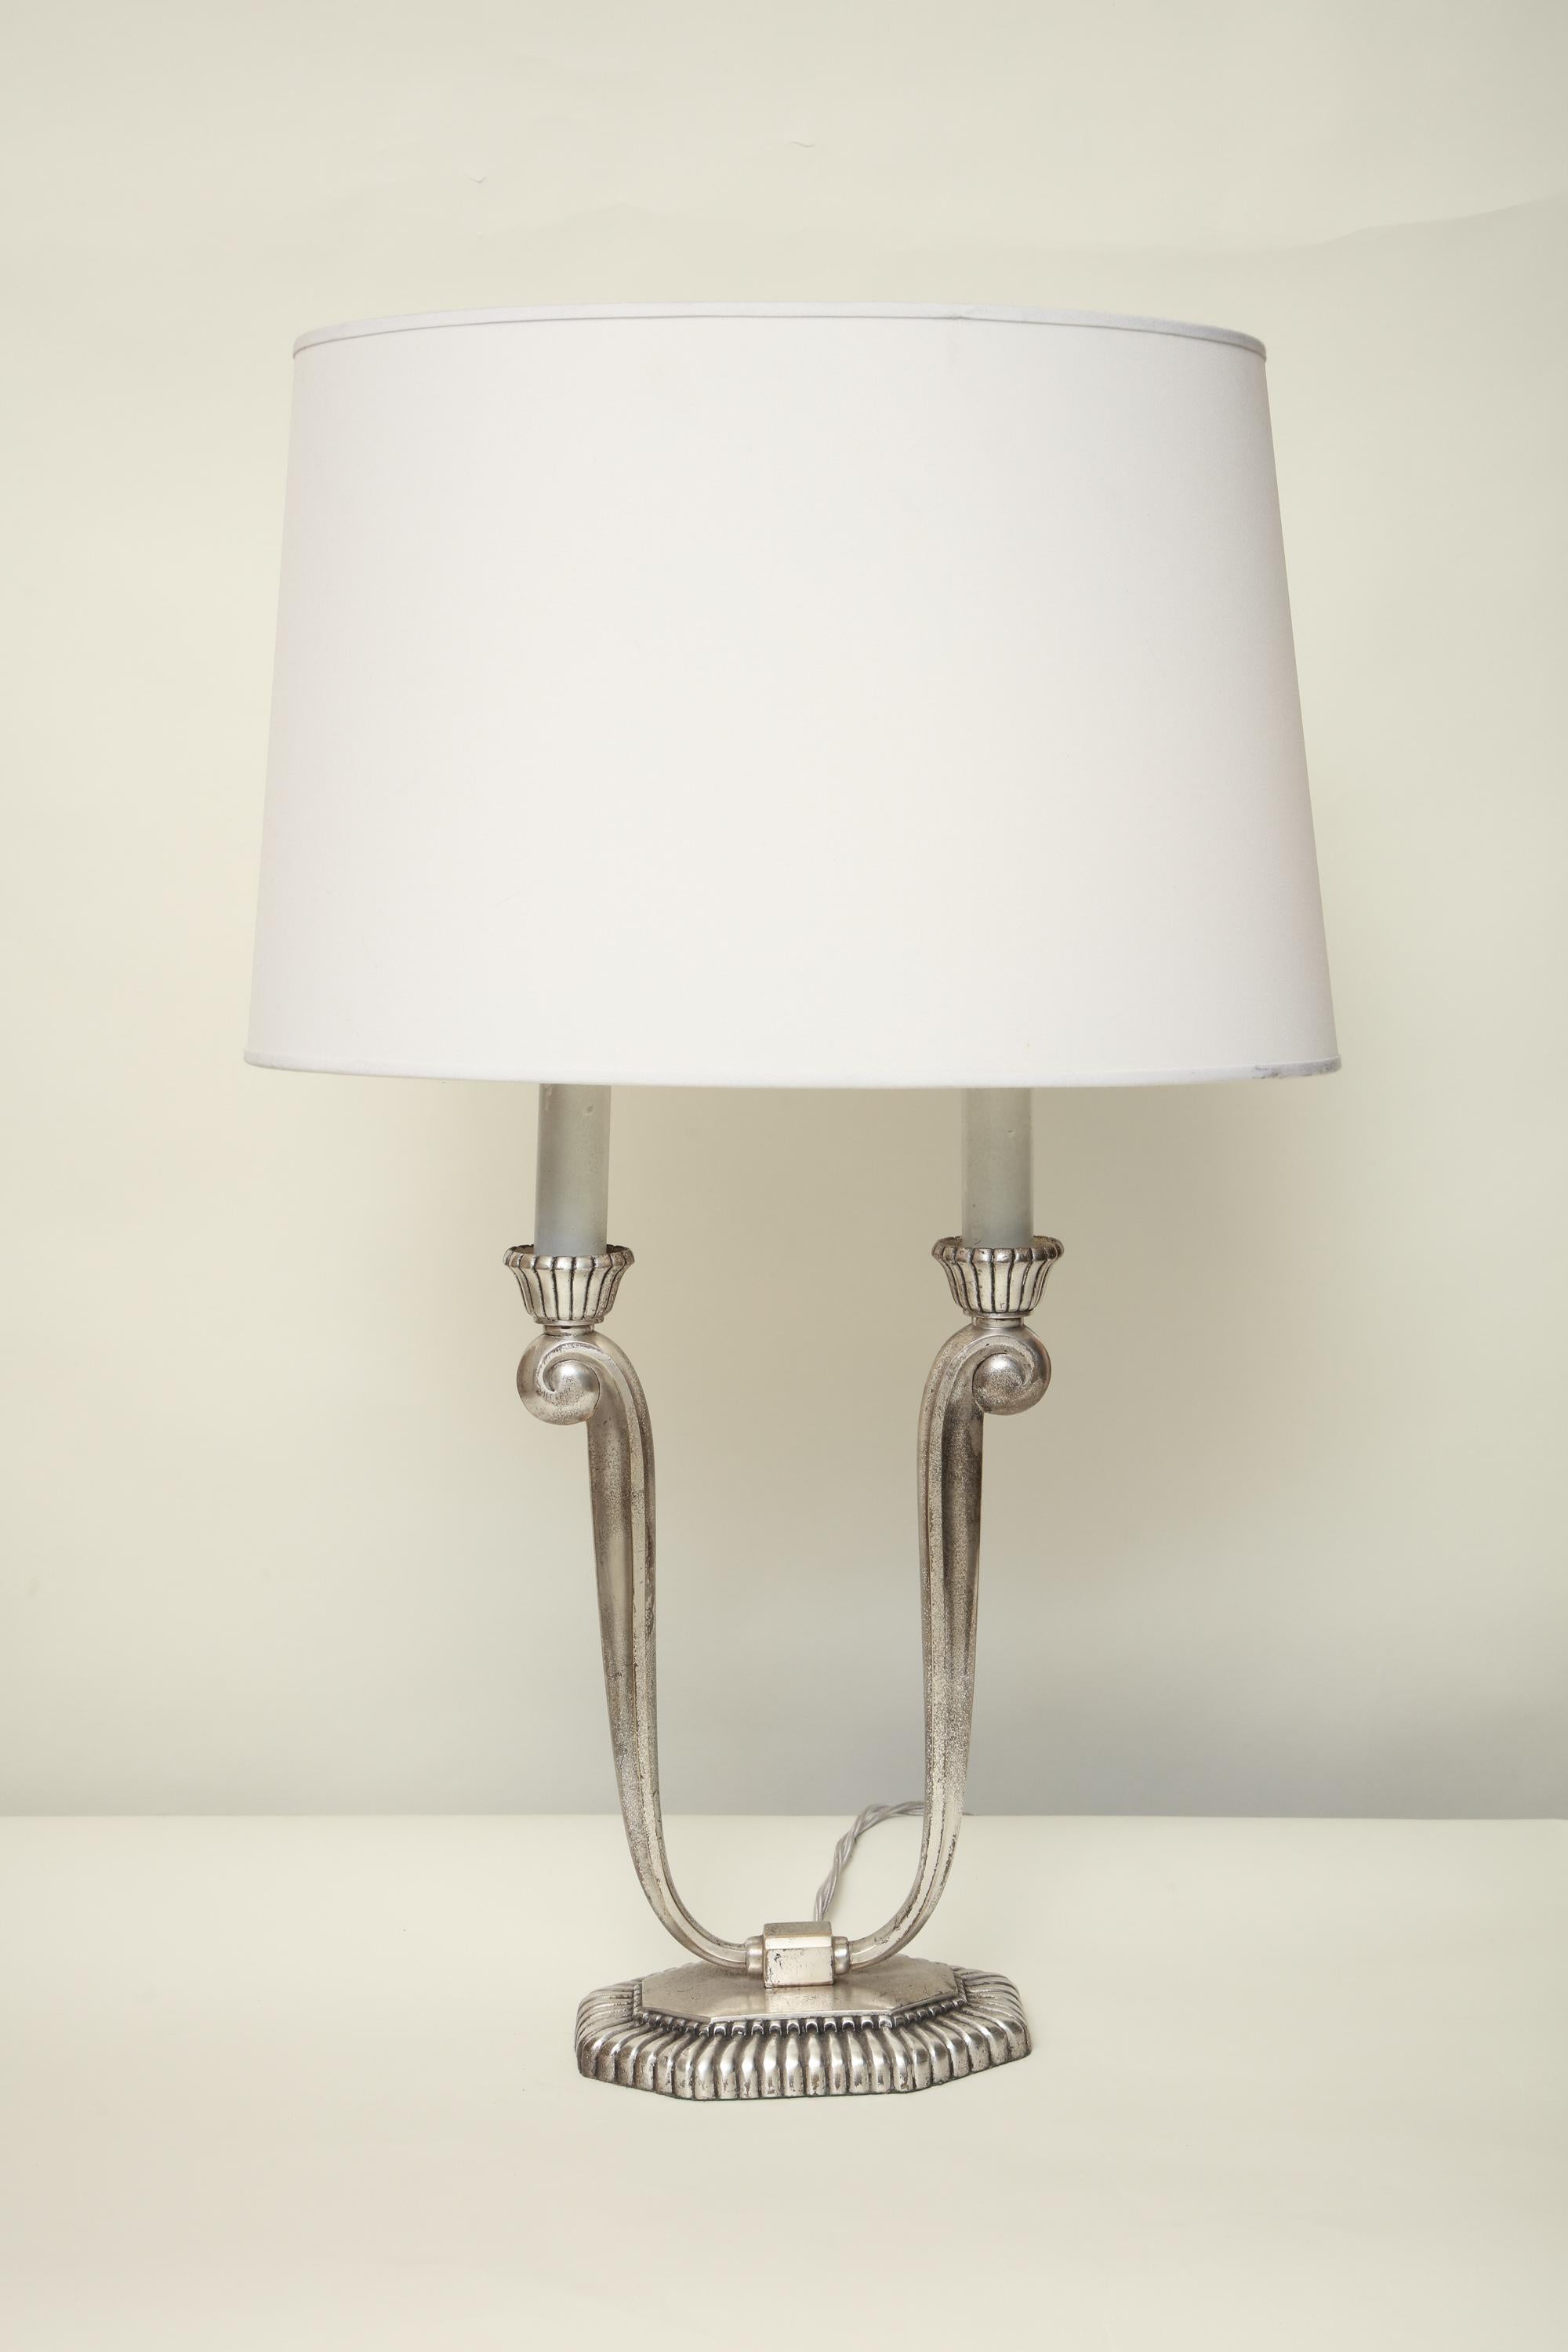 A pair of Art Deco table lamps silver plated over brass silk shades
New sockets and rewired.